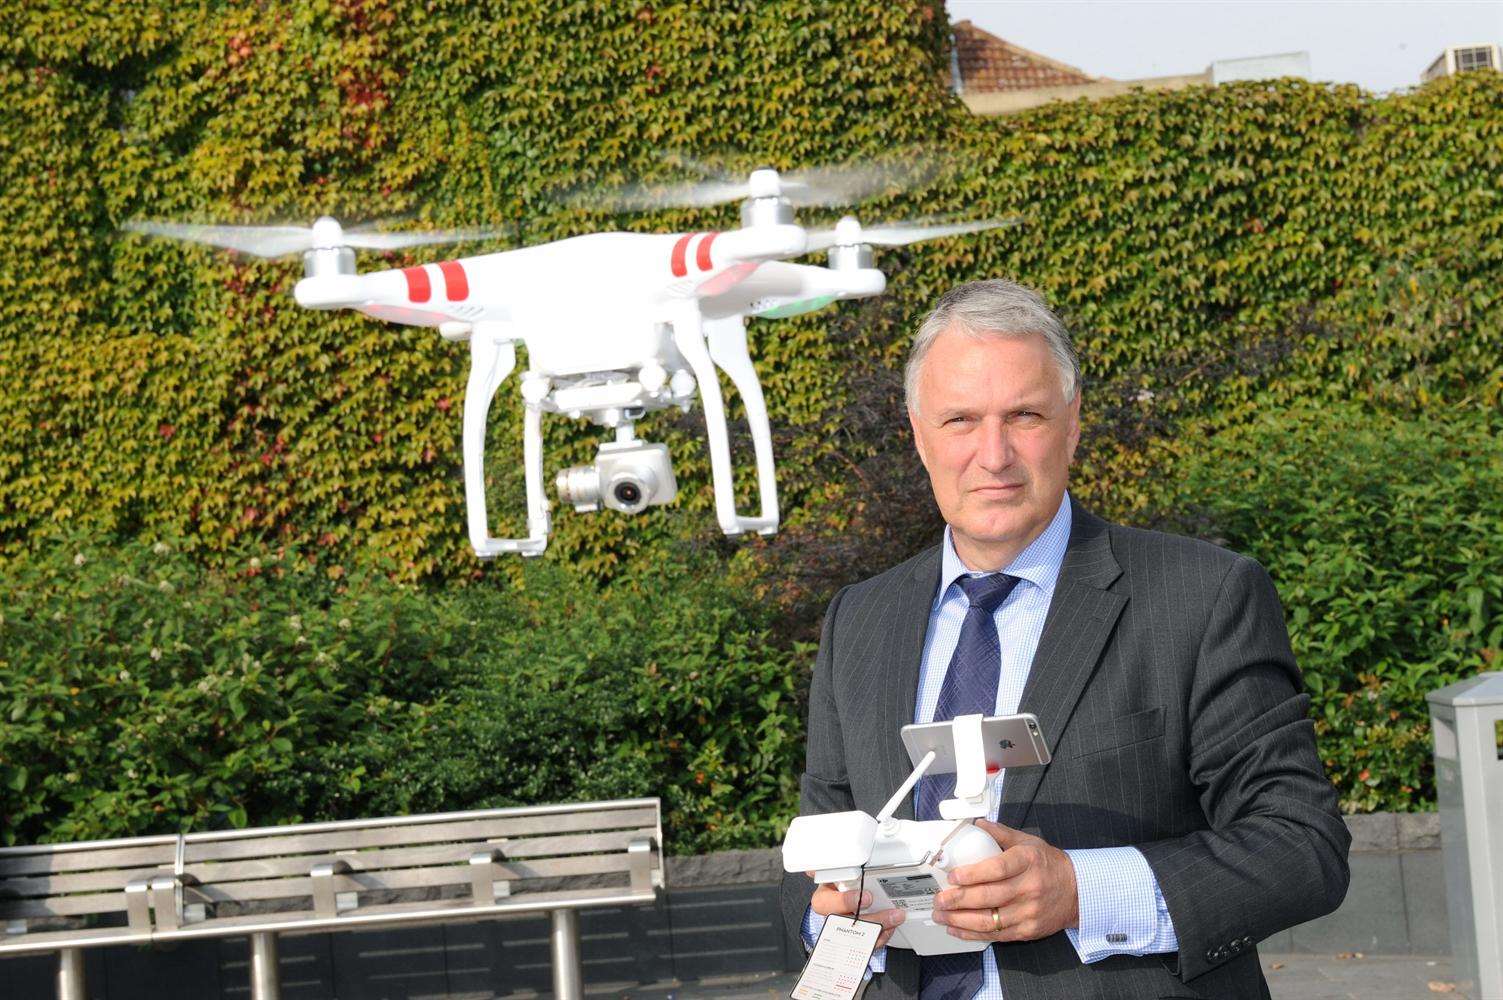 Nigel Miller says the drone is easy to control. Picture: Simon Hildrew